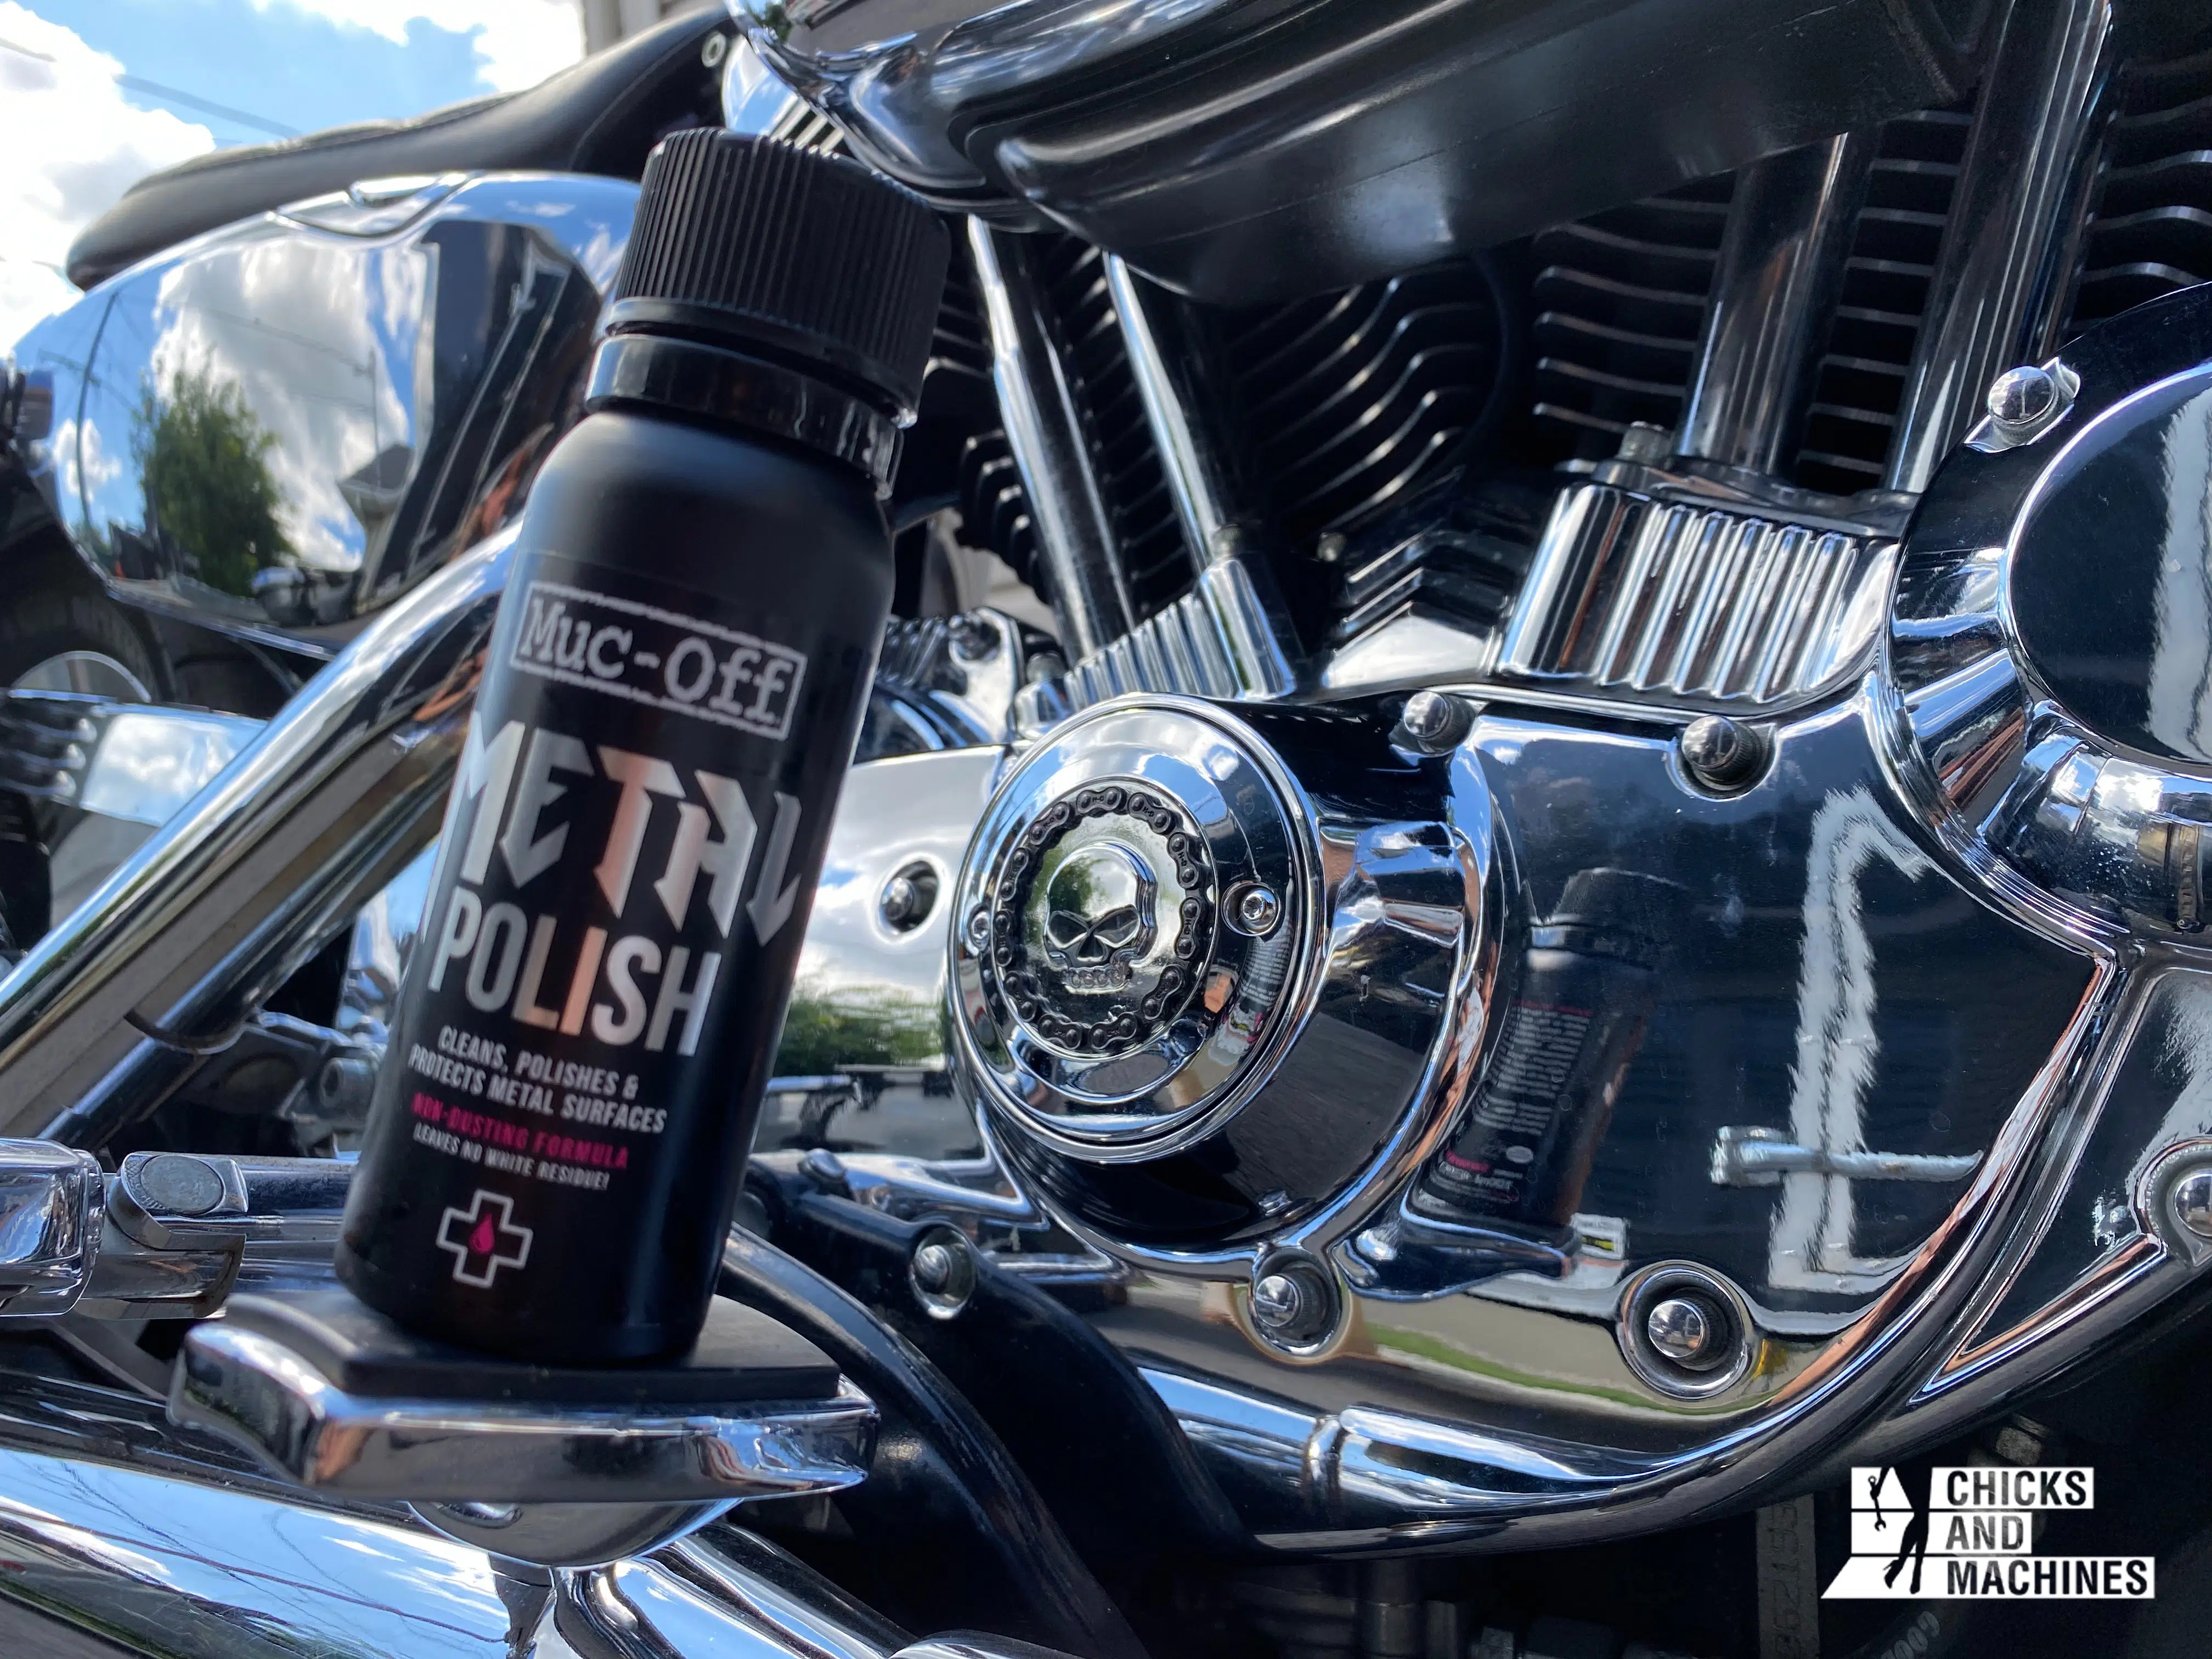 Muc-Off polish for metal surfaces